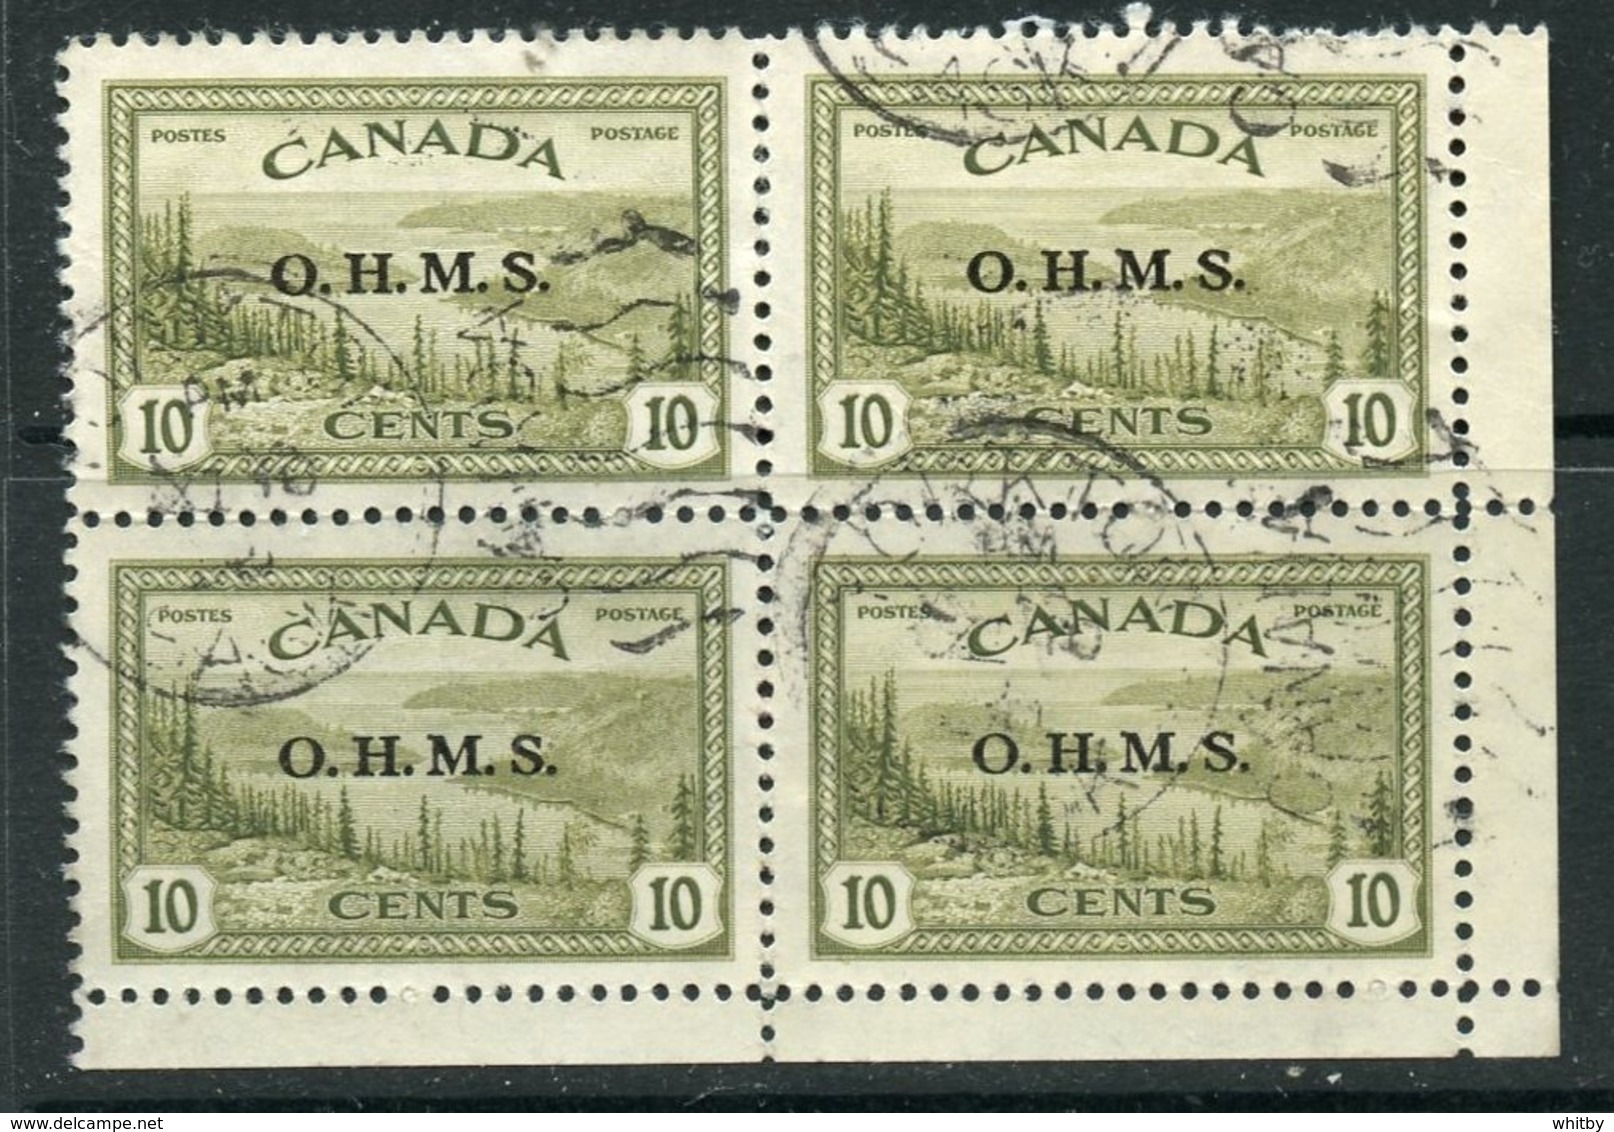 Canada 1949 Official 10 Cent Great Bear Lake  Issue Overprinted OHMS #O6 Block Of 4 - Overprinted